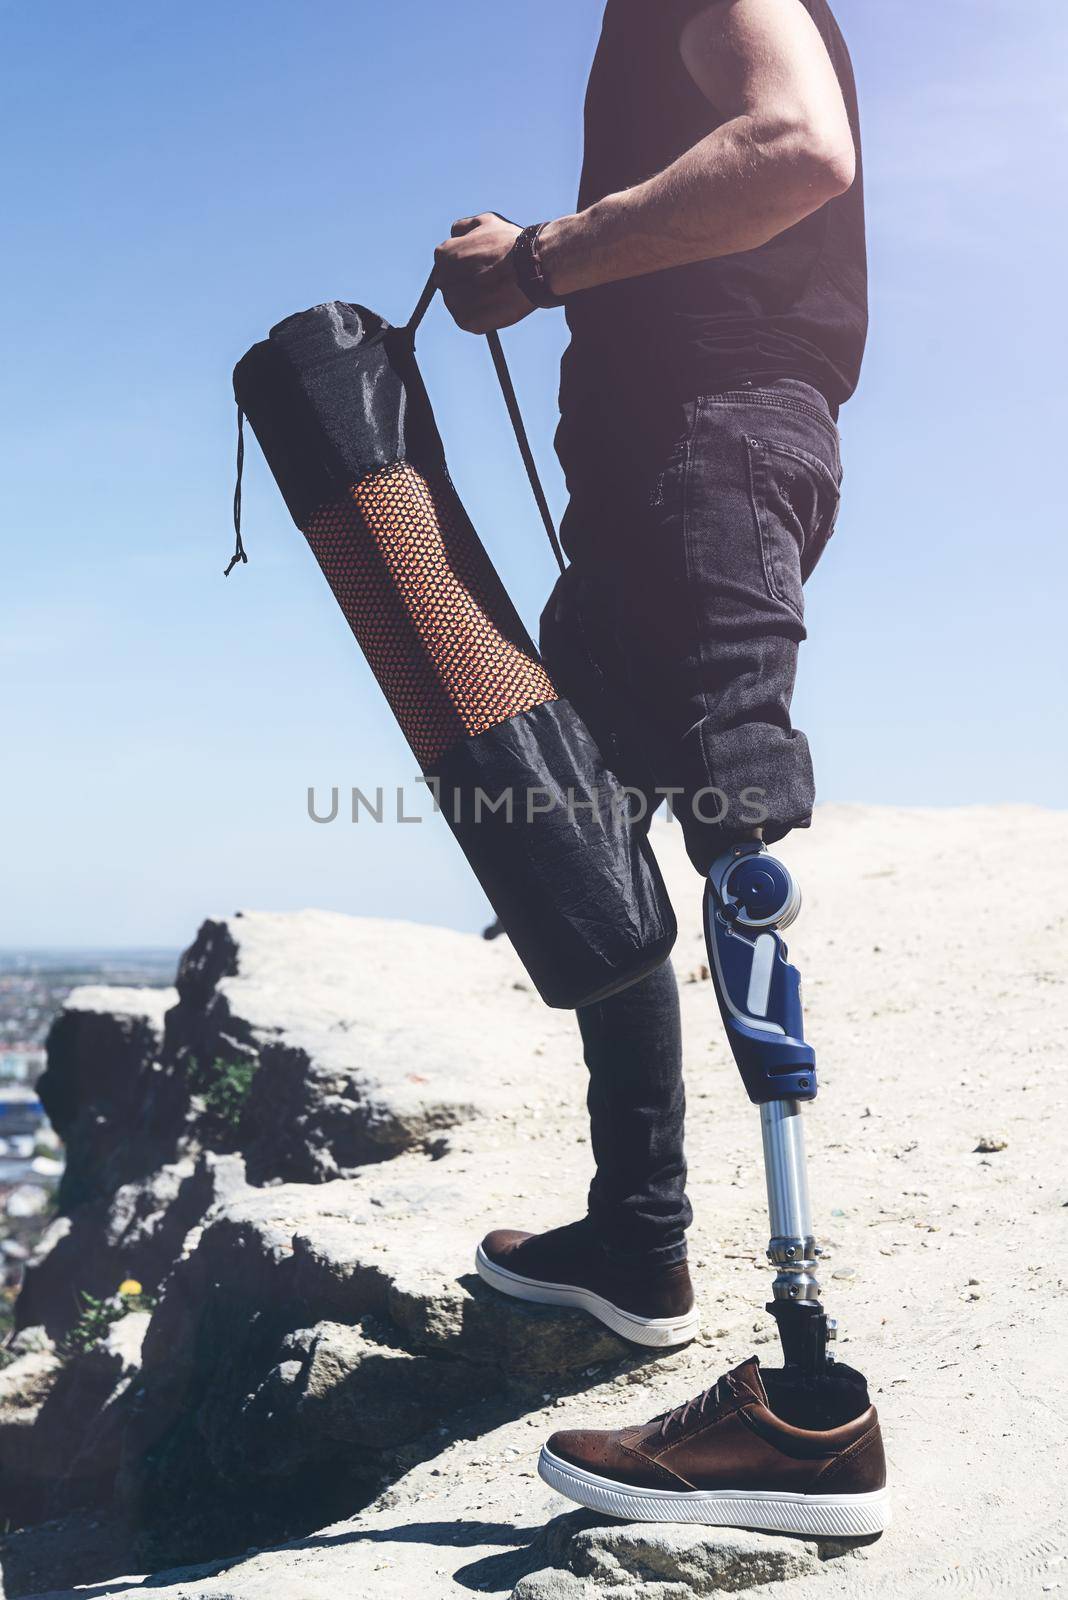 a man on a prosthetic leg travels the mountains. Dressed in black jeans and a T-shirt, he carrying mat.